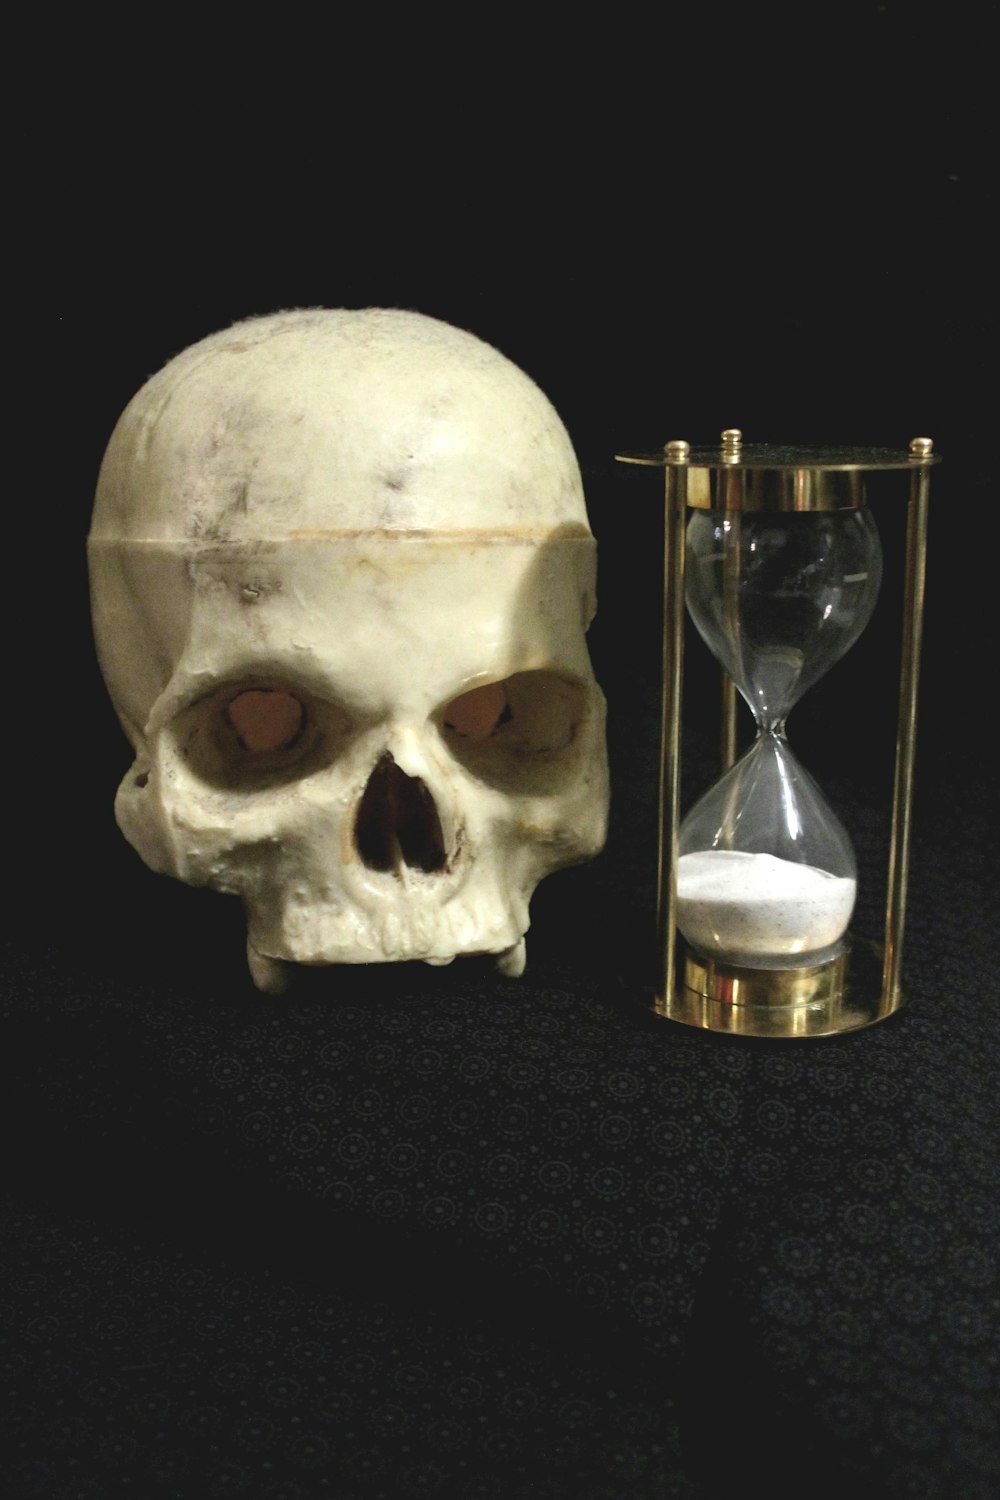 a human skull next to an hourglass